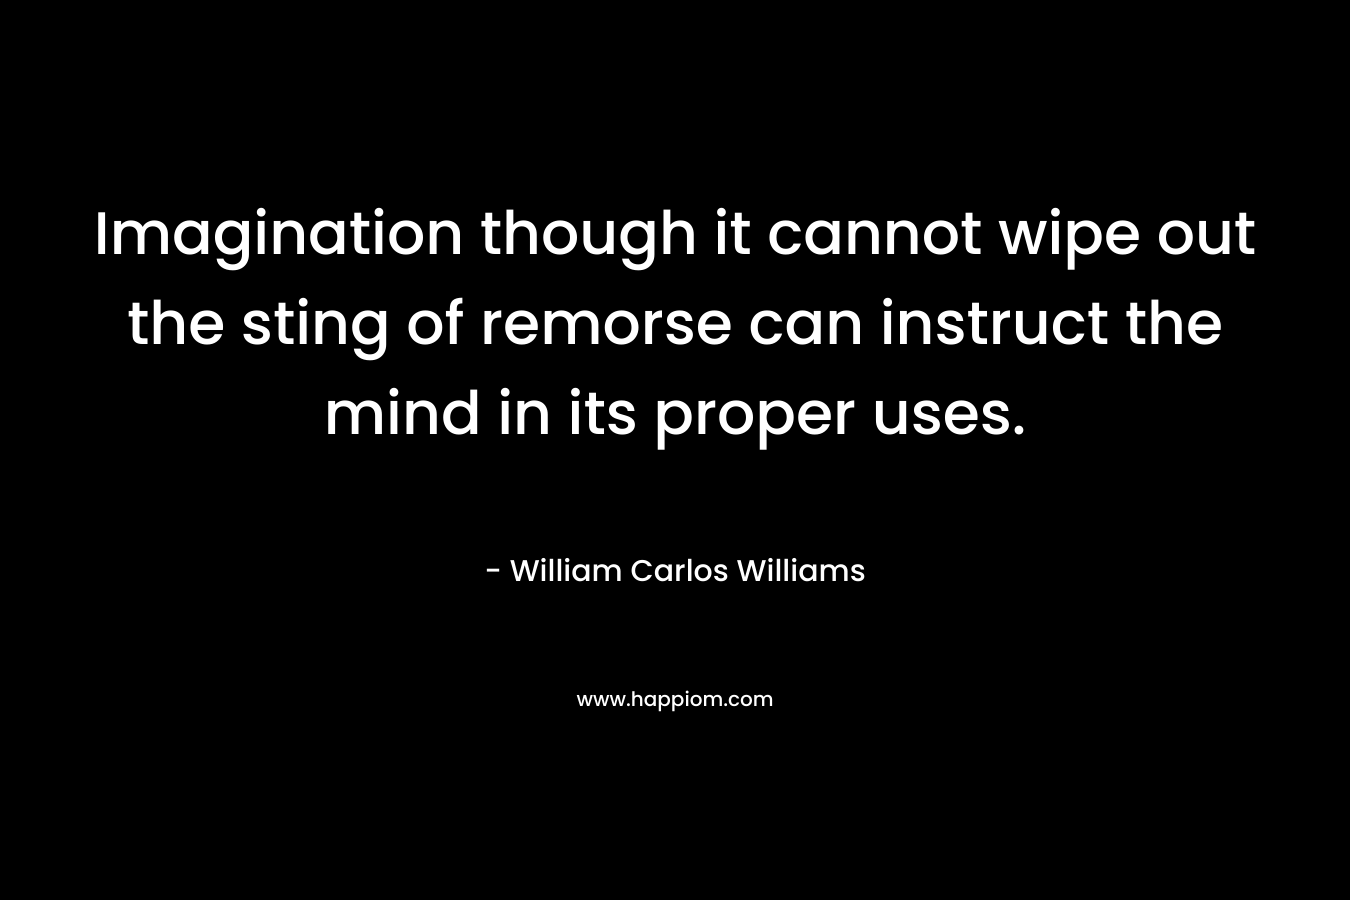 Imagination though it cannot wipe out the sting of remorse can instruct the mind in its proper uses.